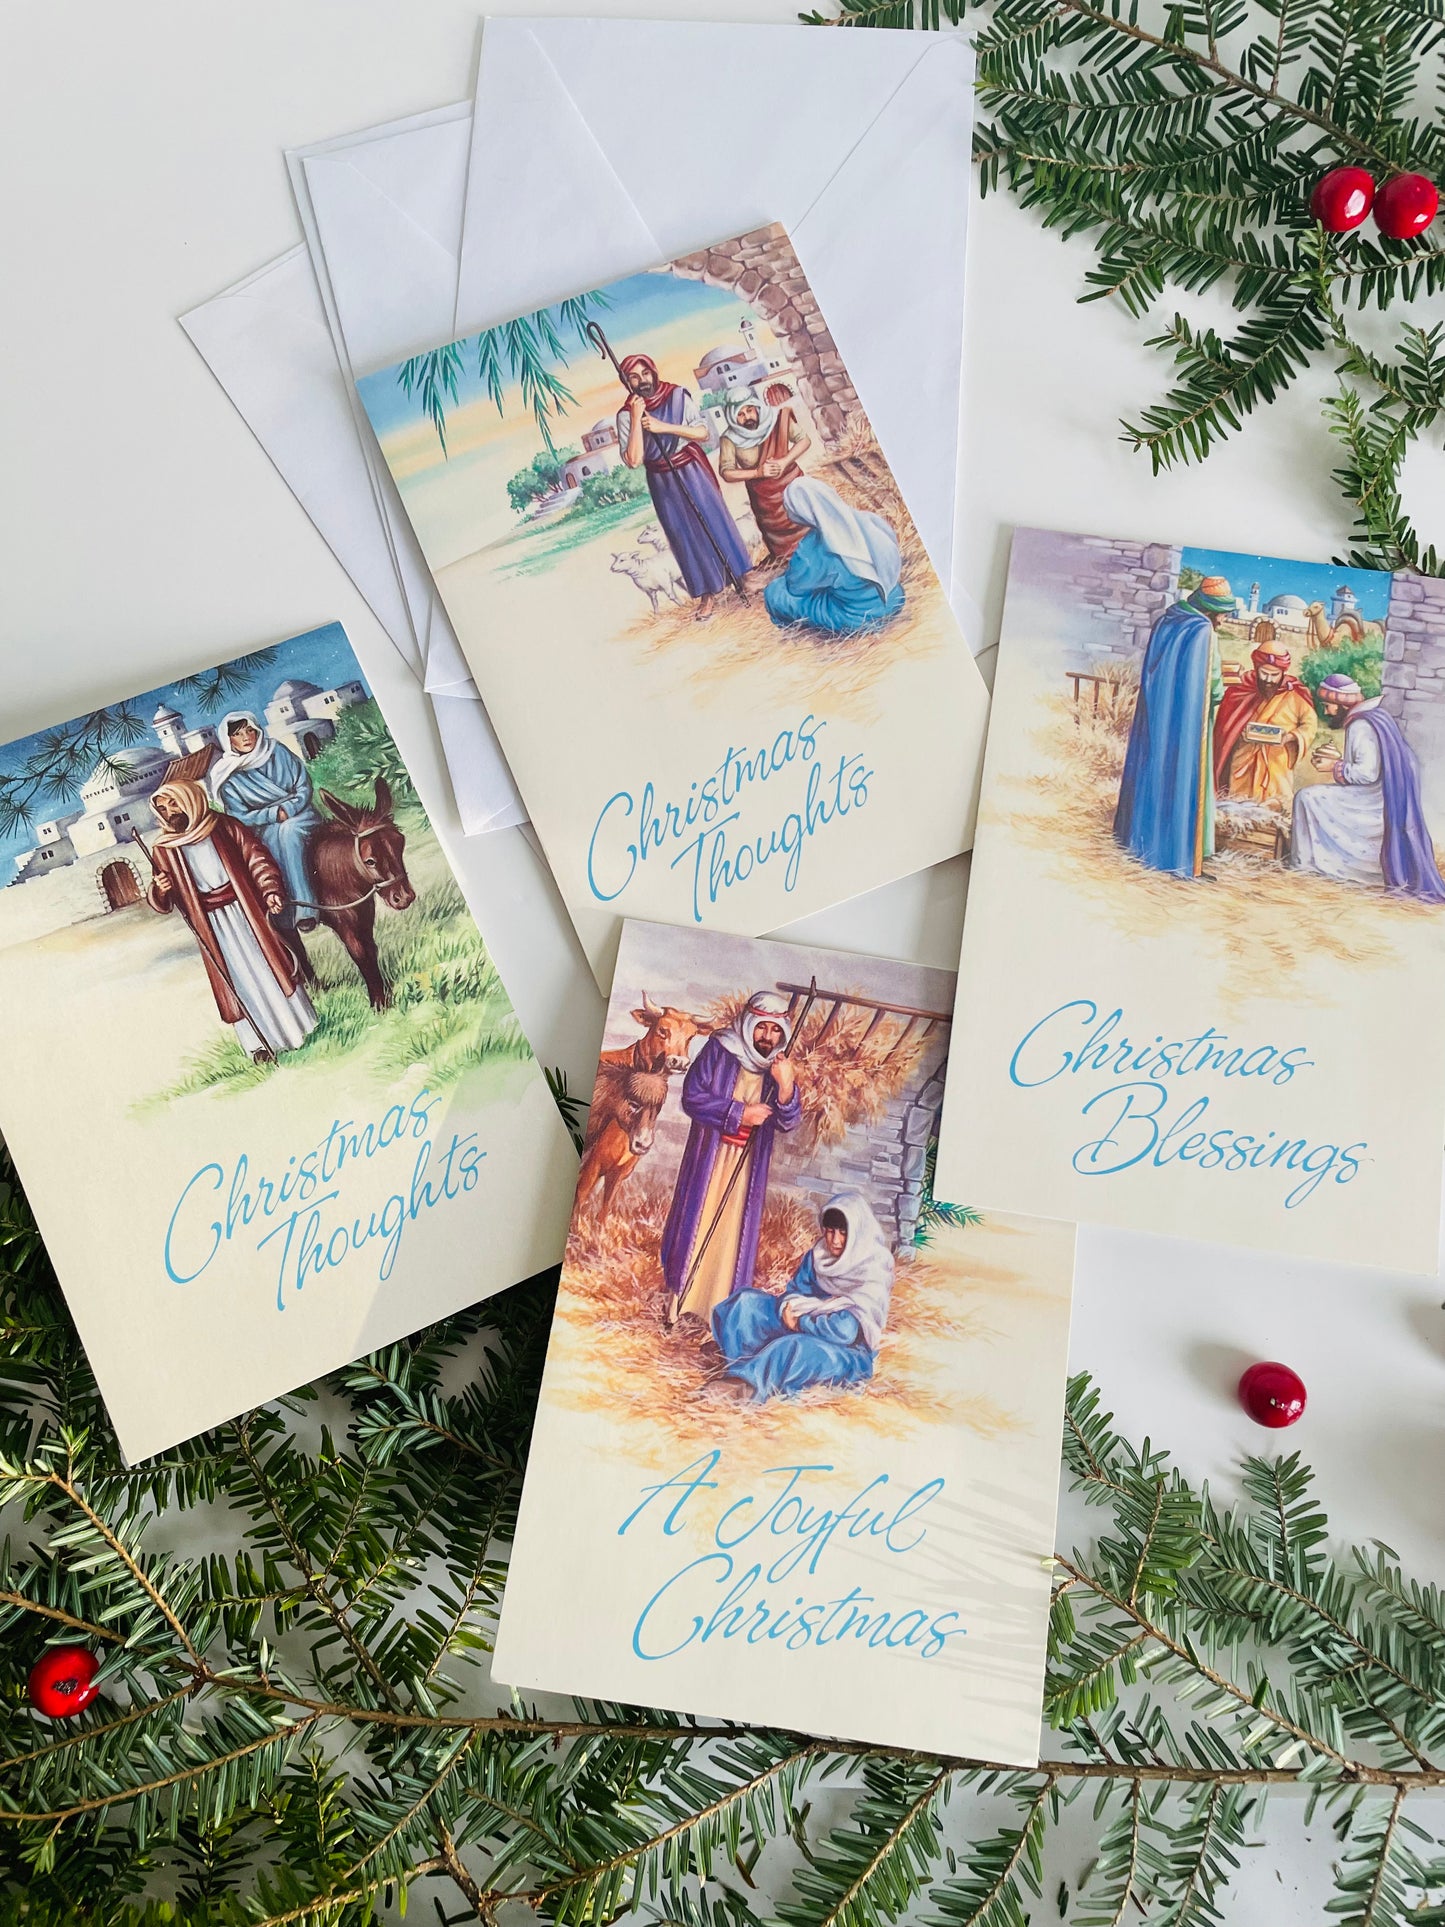 Regal Made in Canada Christmas Greeting Cards with Religious Theme - Set of 4